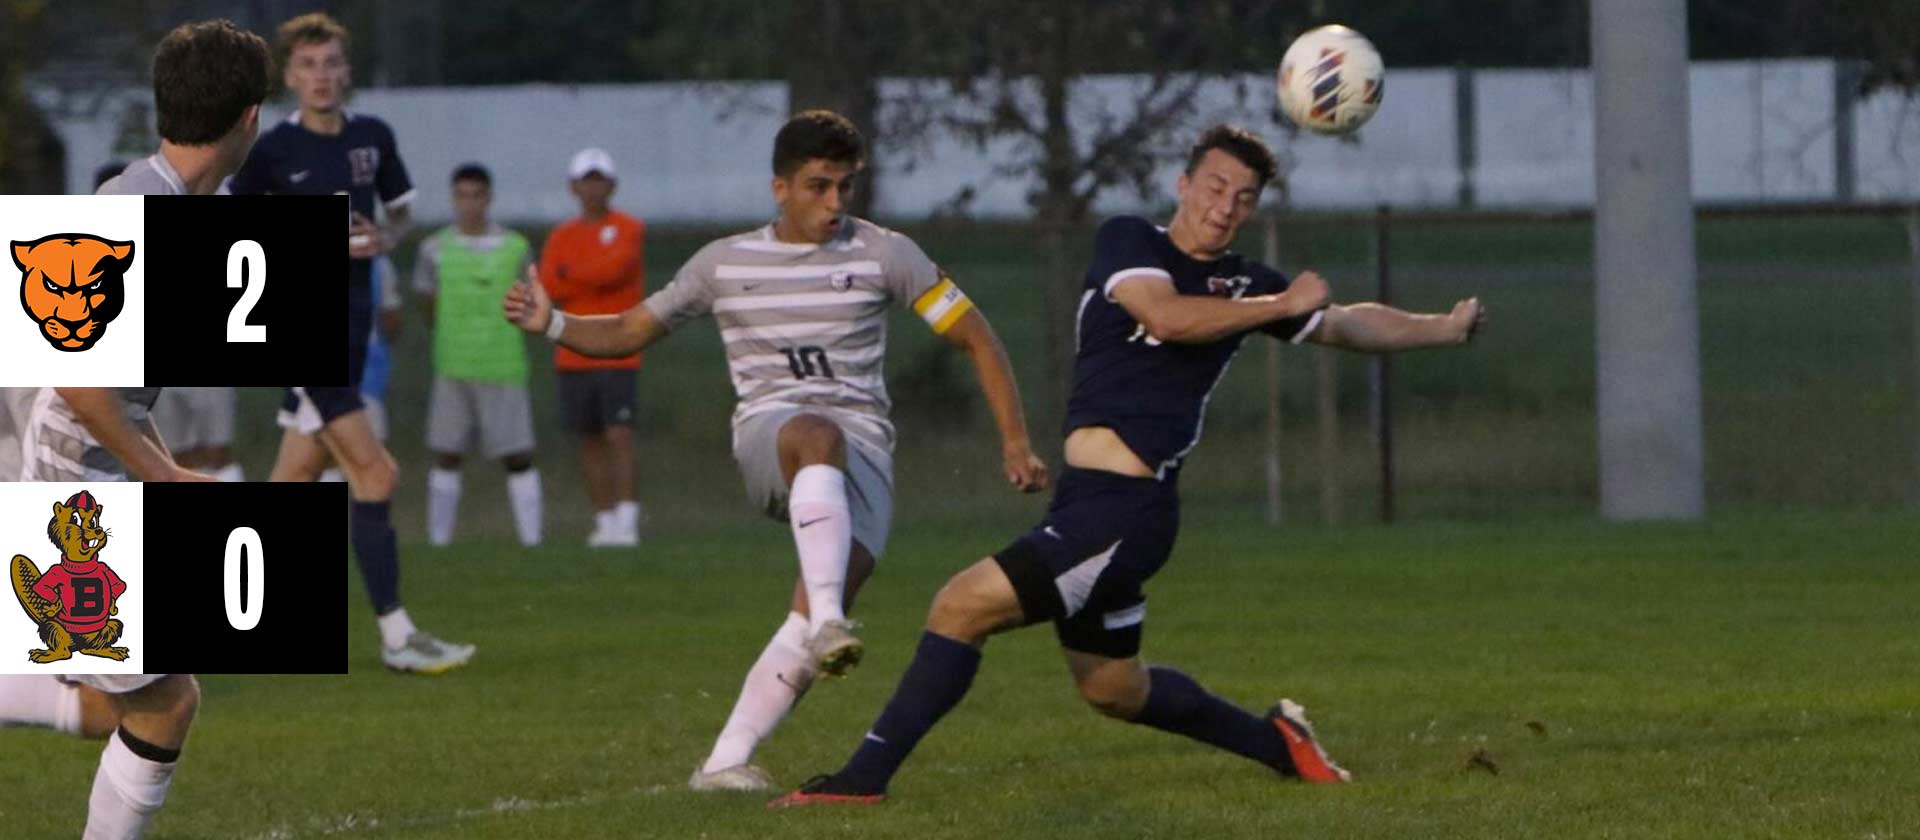 Men's soccer pushes conference unbeaten streak to four with 2-0 win at Blackburn